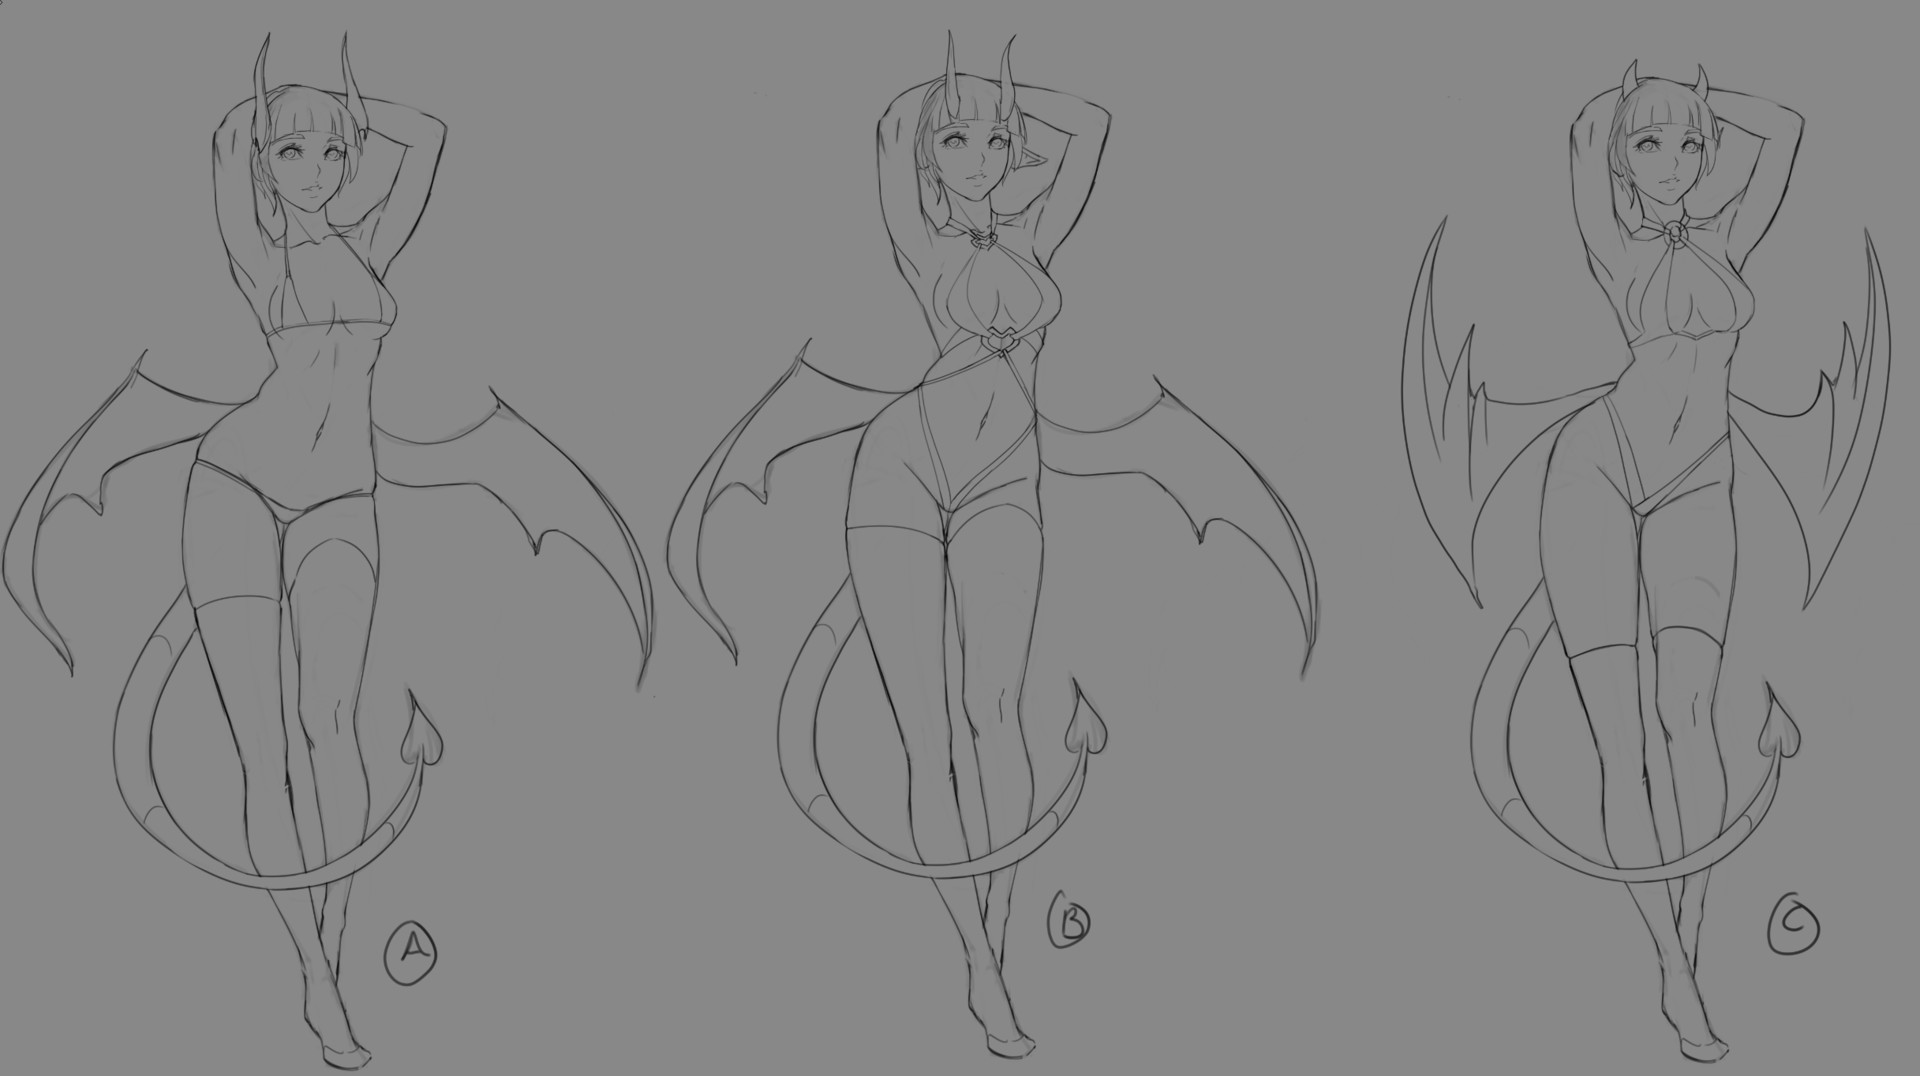 Trying to figure out which micro bikini worked best for the figure. 